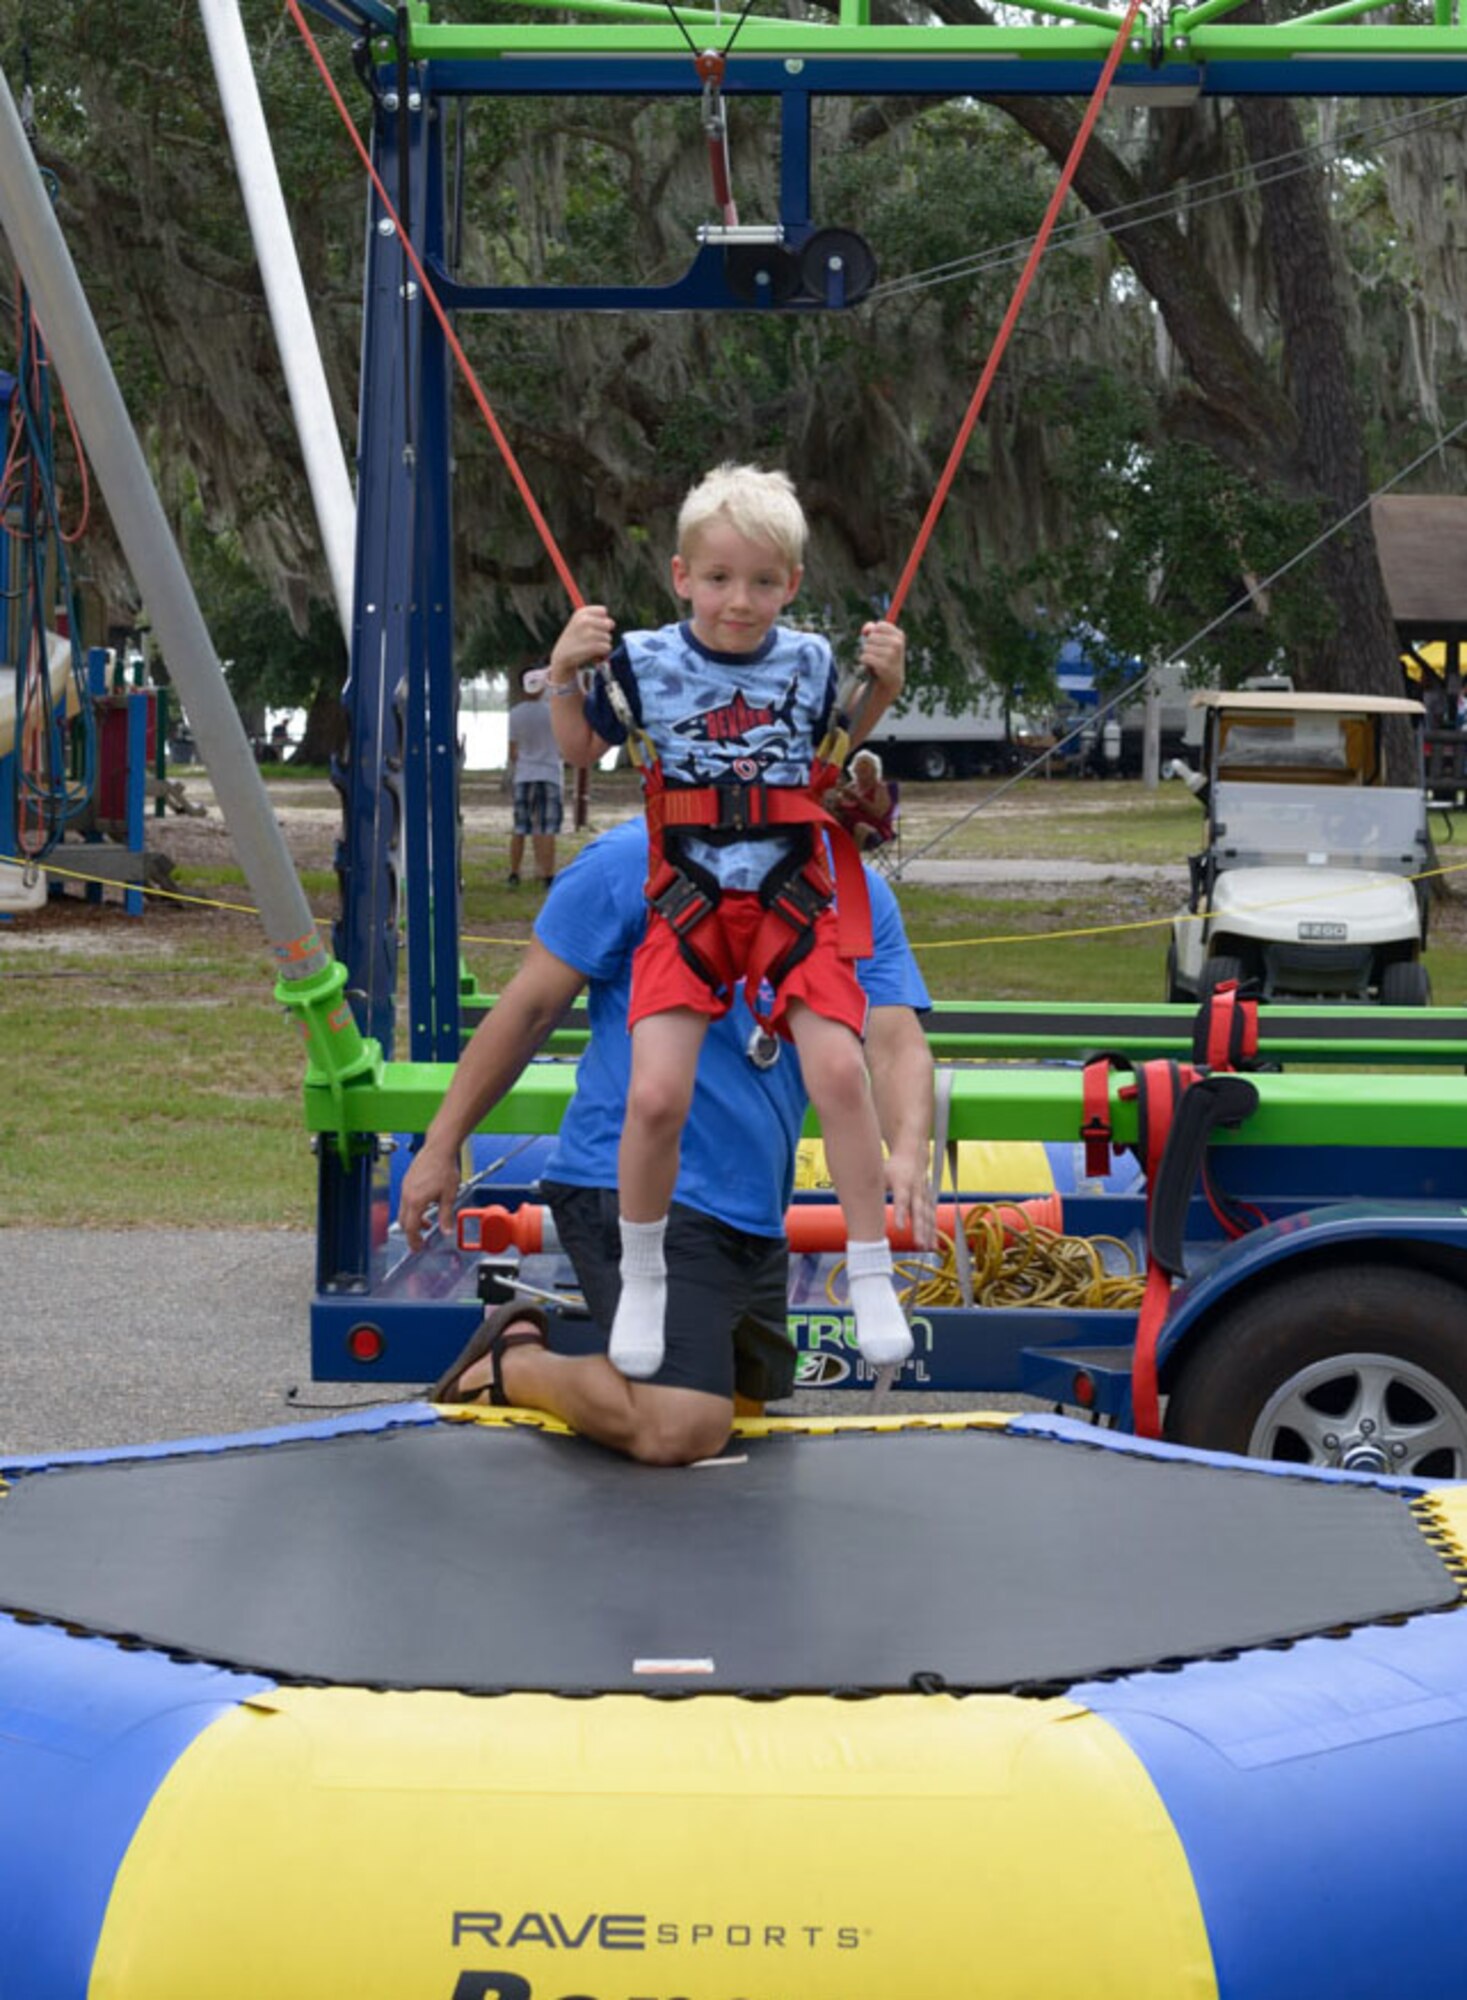 Brody Lindskog, son of U.S. Air Force Tech. Sgt. Levi Lindskog, 4th Space Launch Squadron missile and space system maintenance, Vandenberg Air Force Base, California, jumps on a trampoline during Freedom Fest at Marina Park on Keesler Air Force Base, Mississippi, June 30, 2018. The event included carnival rides, a burger cook-off, hot wings and watermelon eating competitions and a fireworks display. (U.S. Air Force photo by Andre’ Askew)